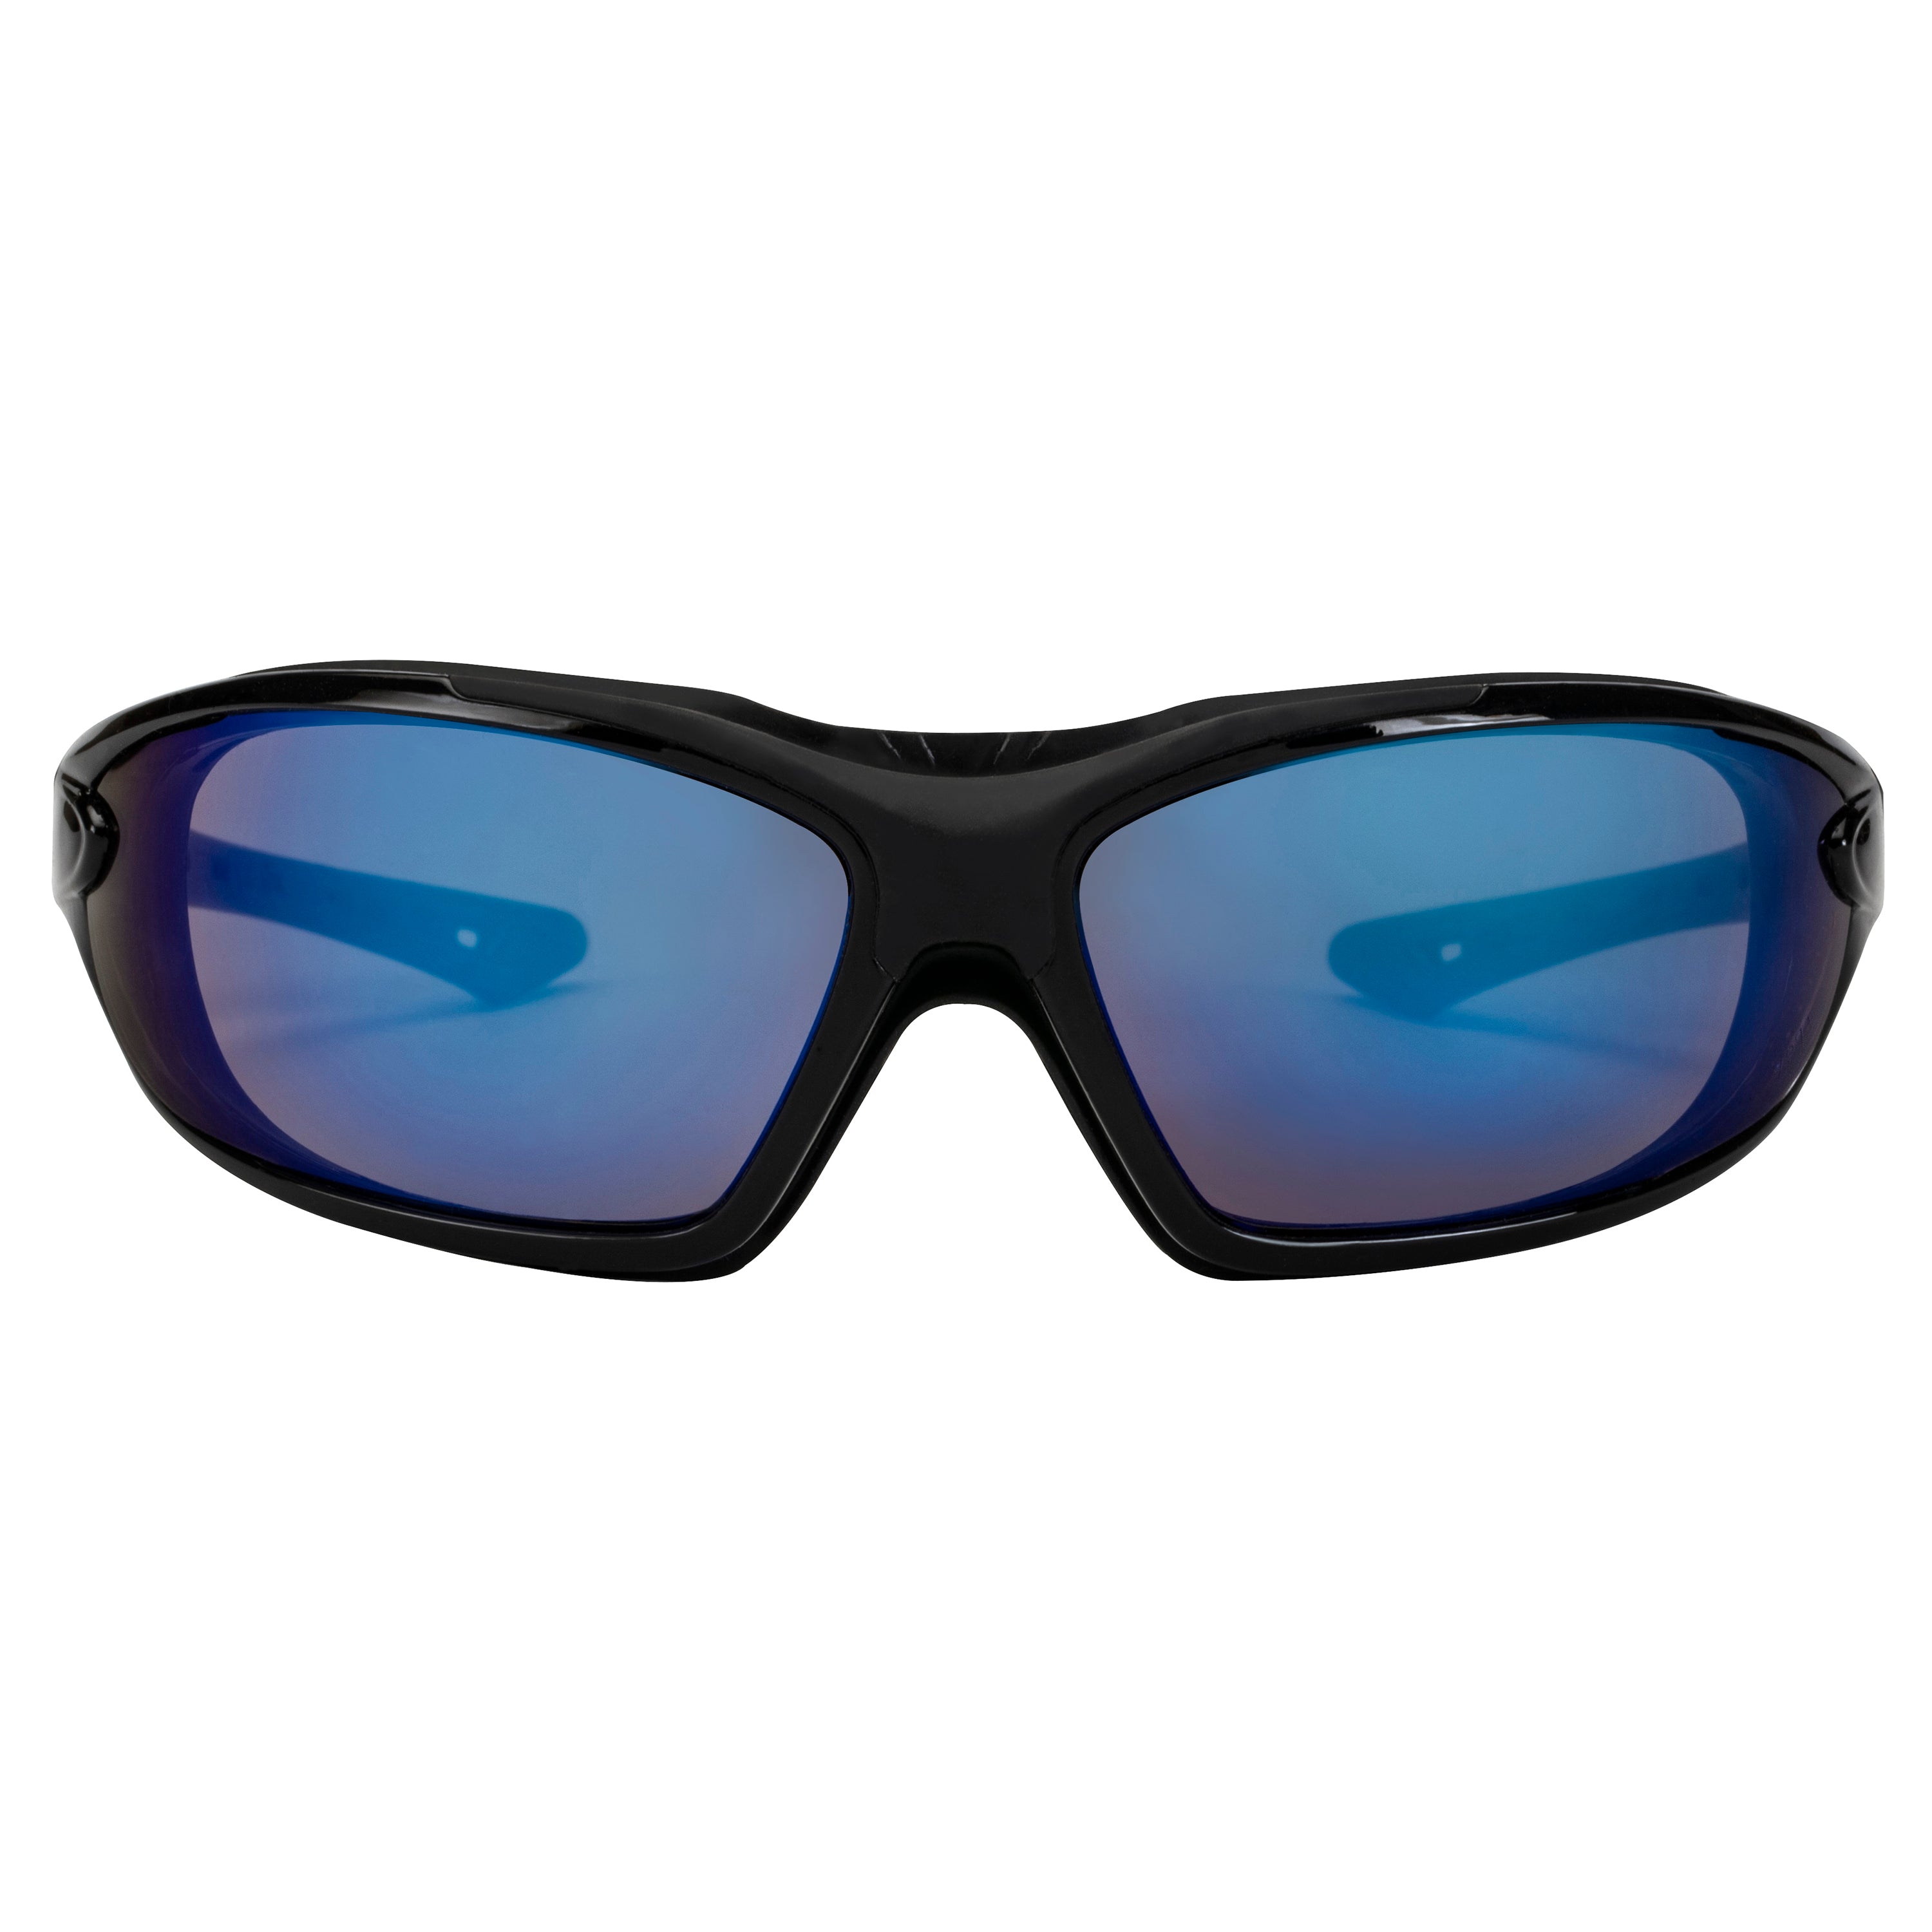 Blue Mirror Lens Sport Safety Sunglasses with Swappable Strap and Gasketed Goggle Padding.